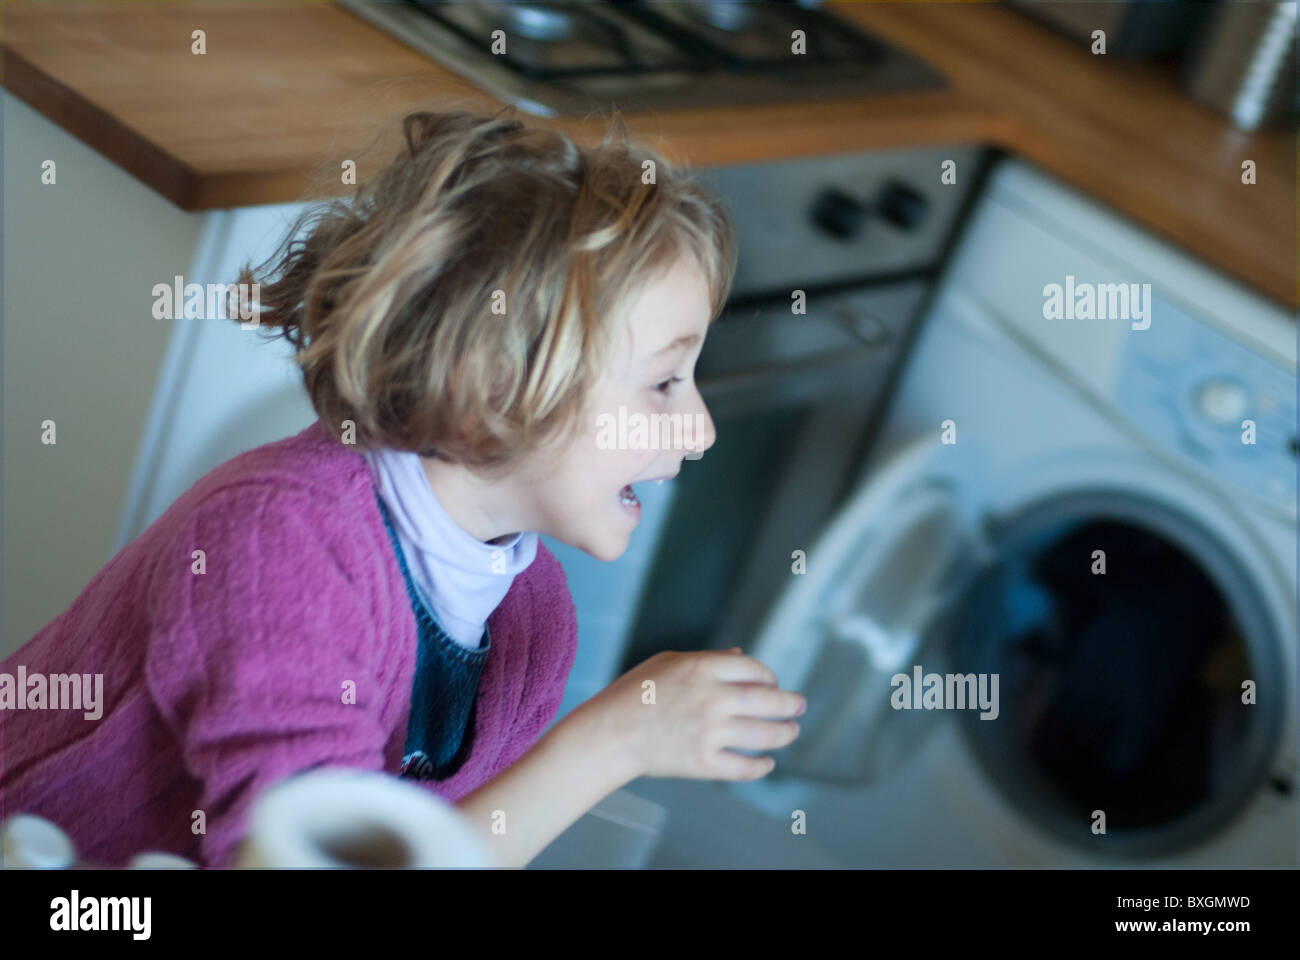 Little blond girl laughing and running around in the kitchen, France. Stock Photo